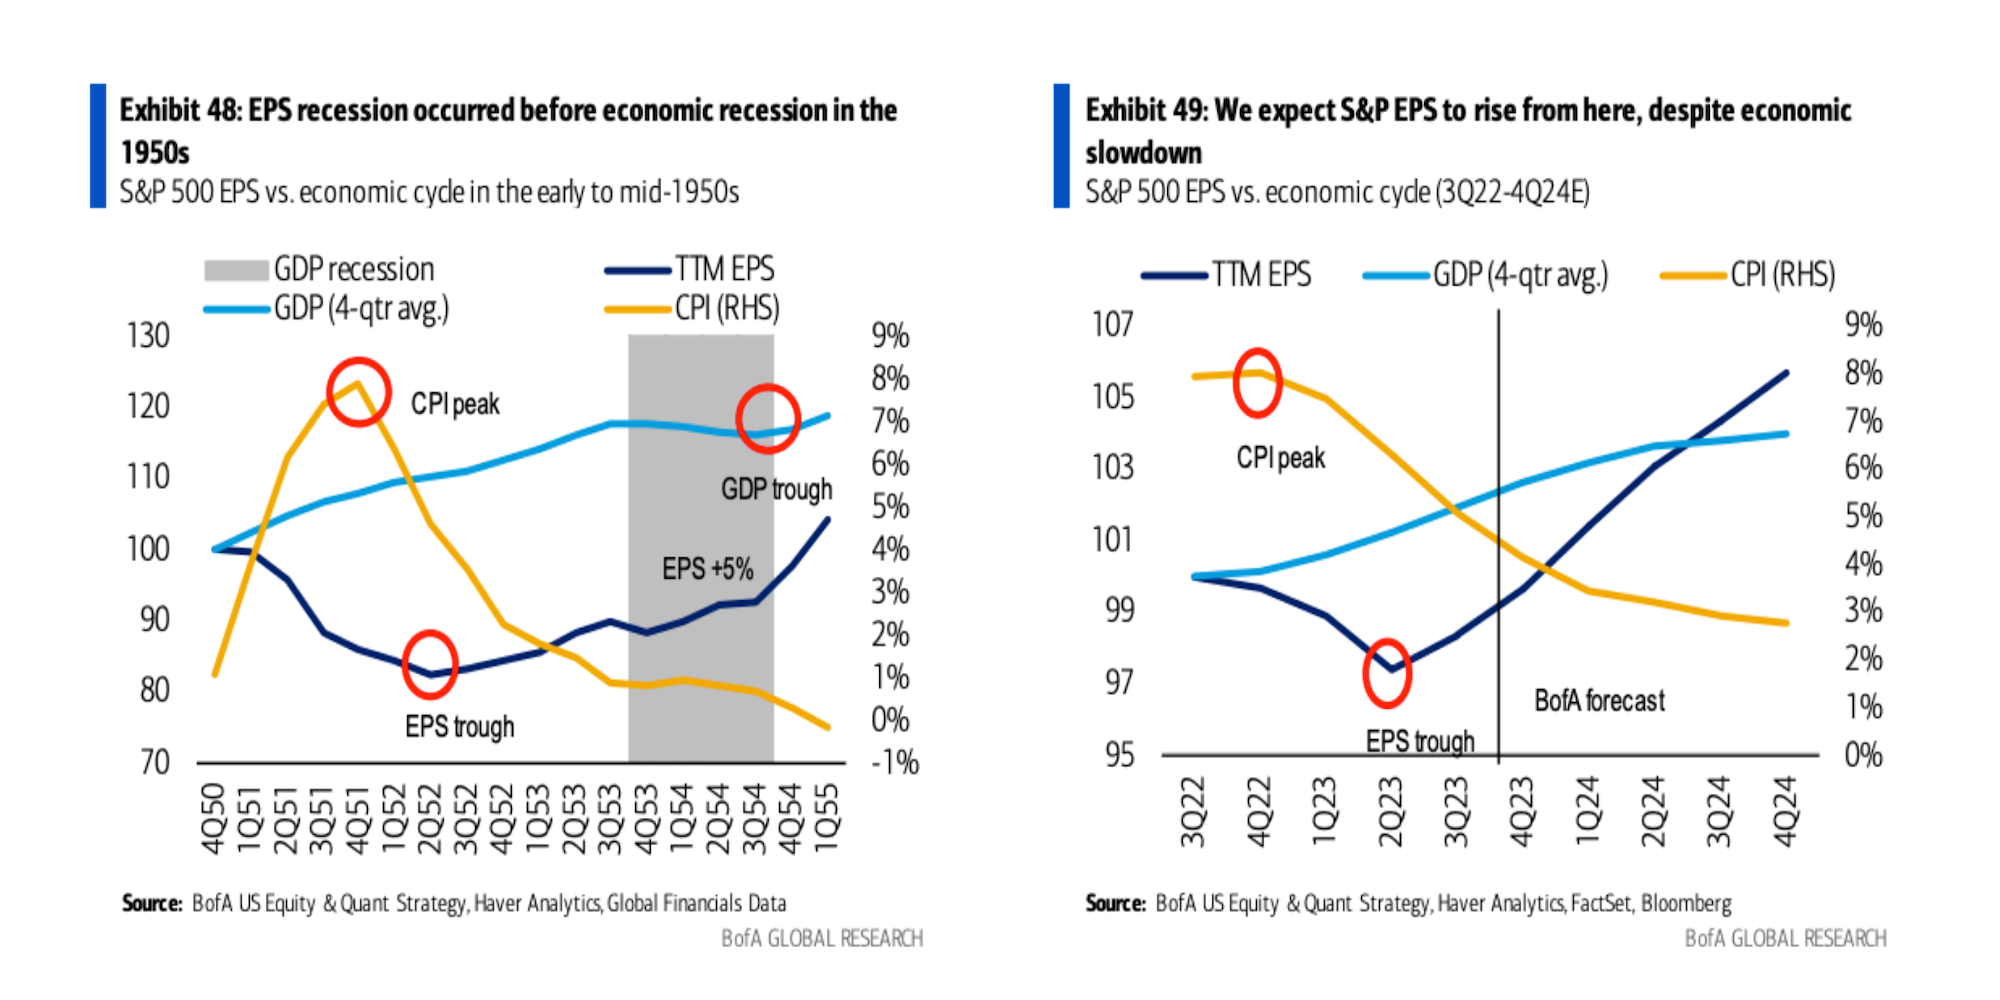 In the 1950s an earnings recession preceded an economic downturn. Between Q4 of 1950 and Q2 of 1952, S&P EPS plunged 18% peak-to-trough, even as the US economy expanded. Inflation peaked two quarters before EPS troughed on a TTM basis and that’s similar to how the current EPS cycle played out - 